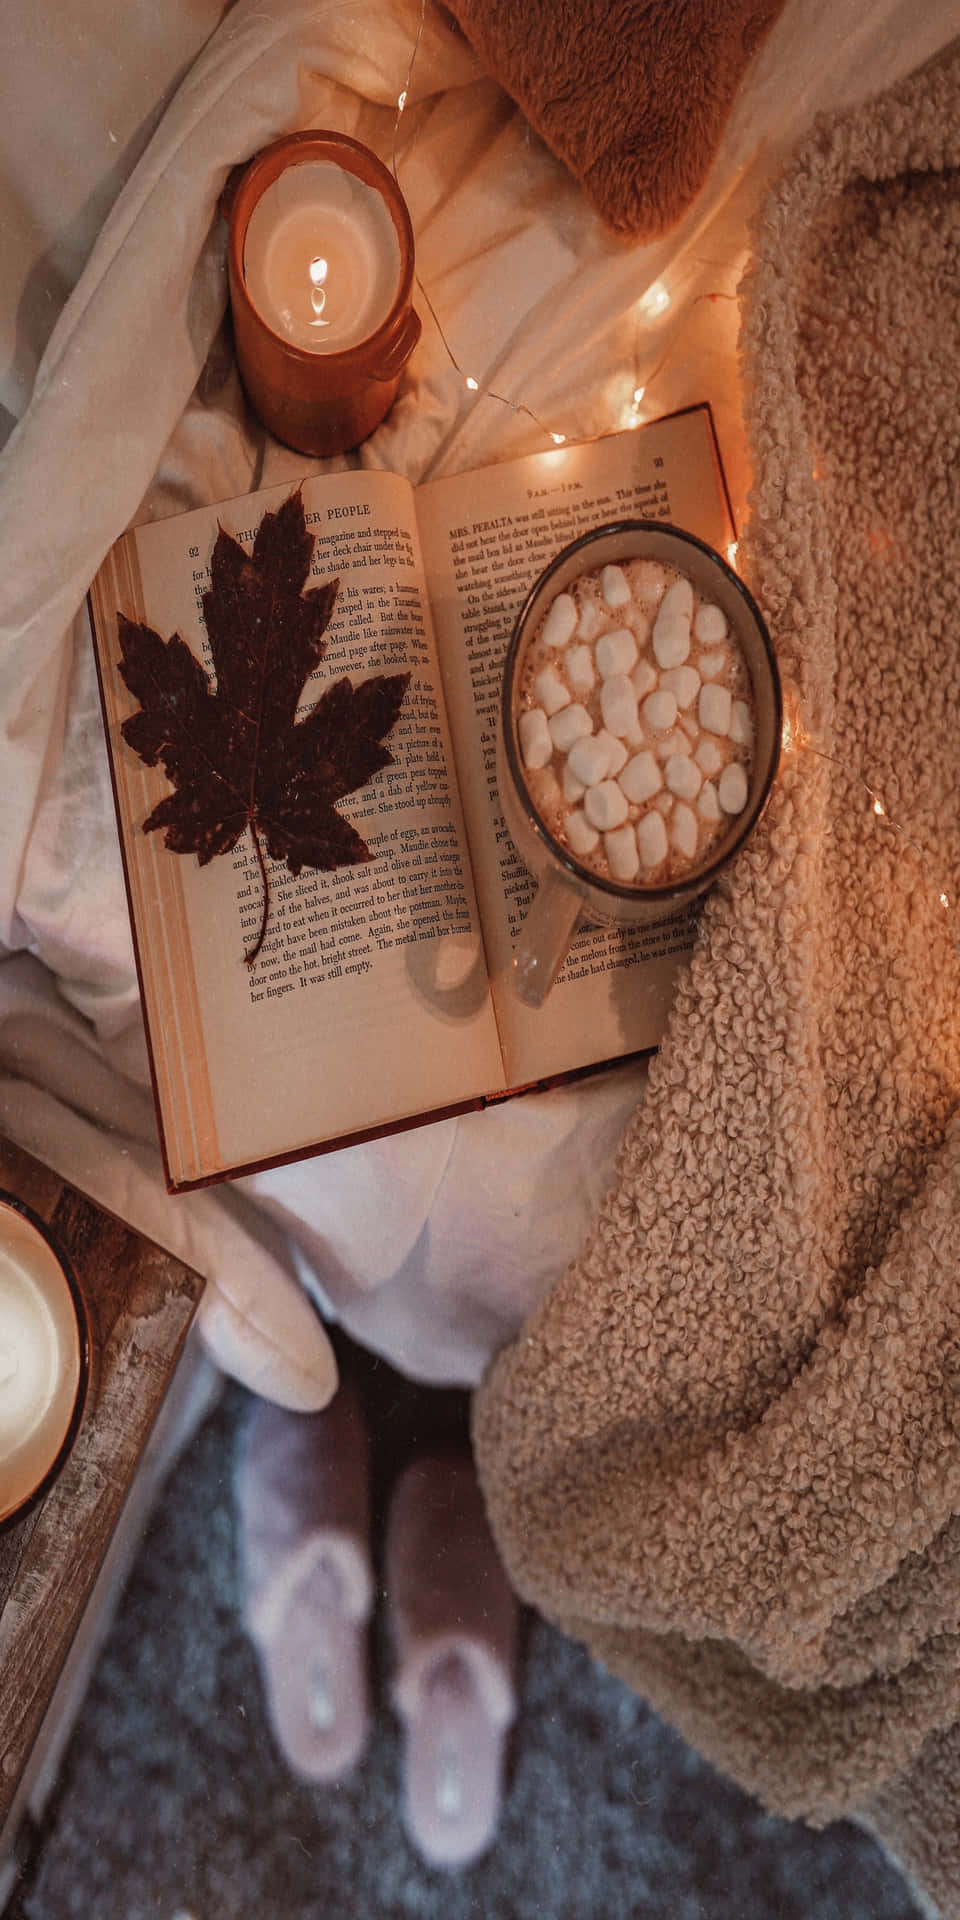 Pixel 3 Fall Maple Leaf, Candles, And A Book Background